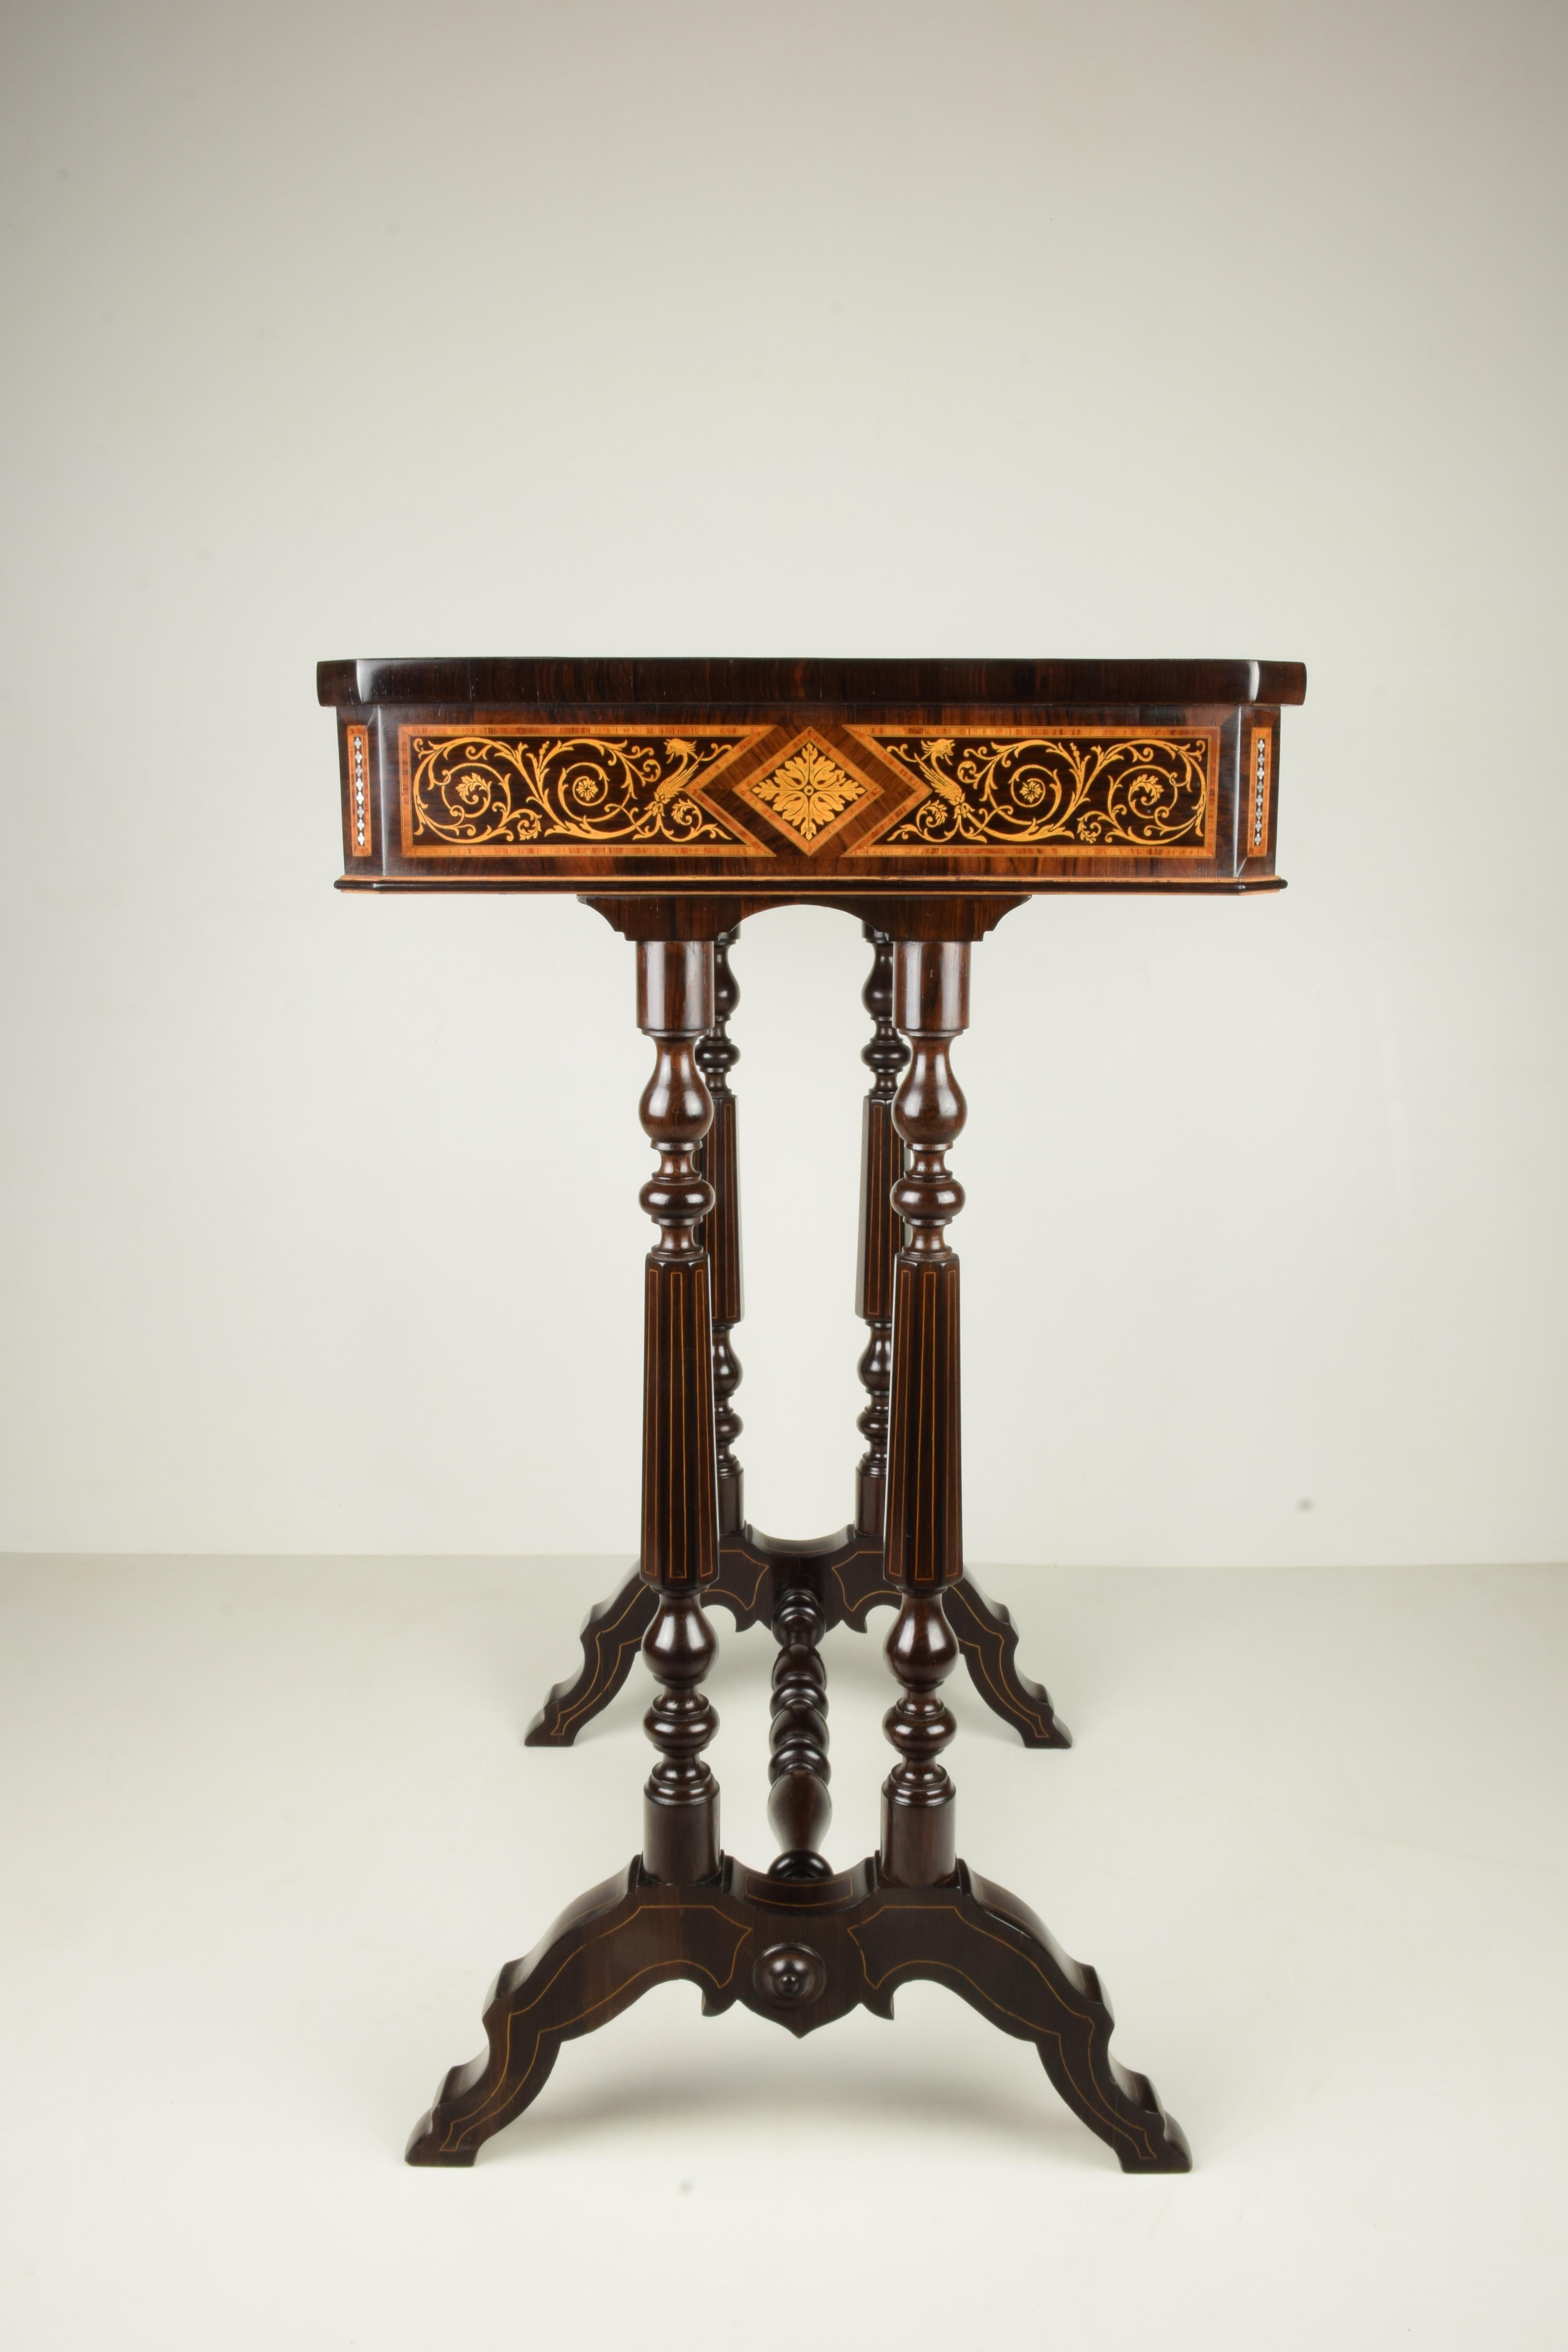 This table is characterized by the high quality of the decoration, a dense but orderly inlay, evident in the absolute precision in cutting and combination of the various materials (palisander, rosewood, boxwood and nacre), arranged on the bottom of